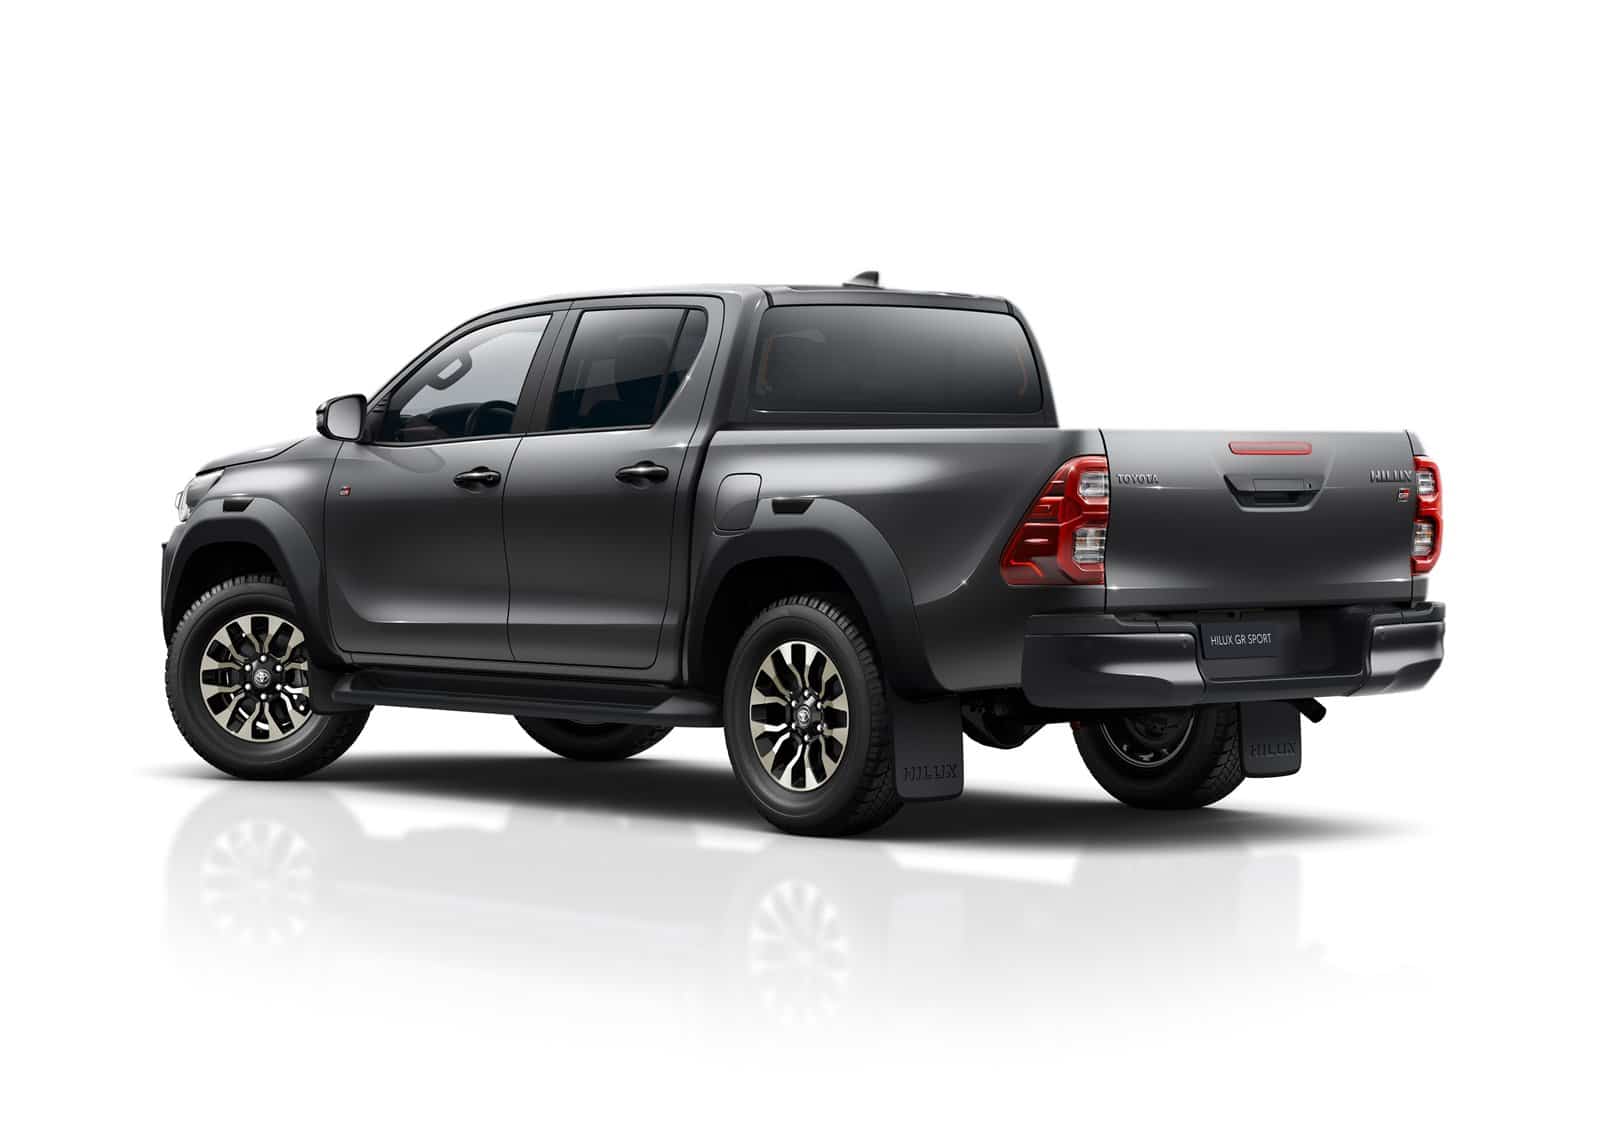 The Toyota Hilux GR Sport will arrive in Spain next summer